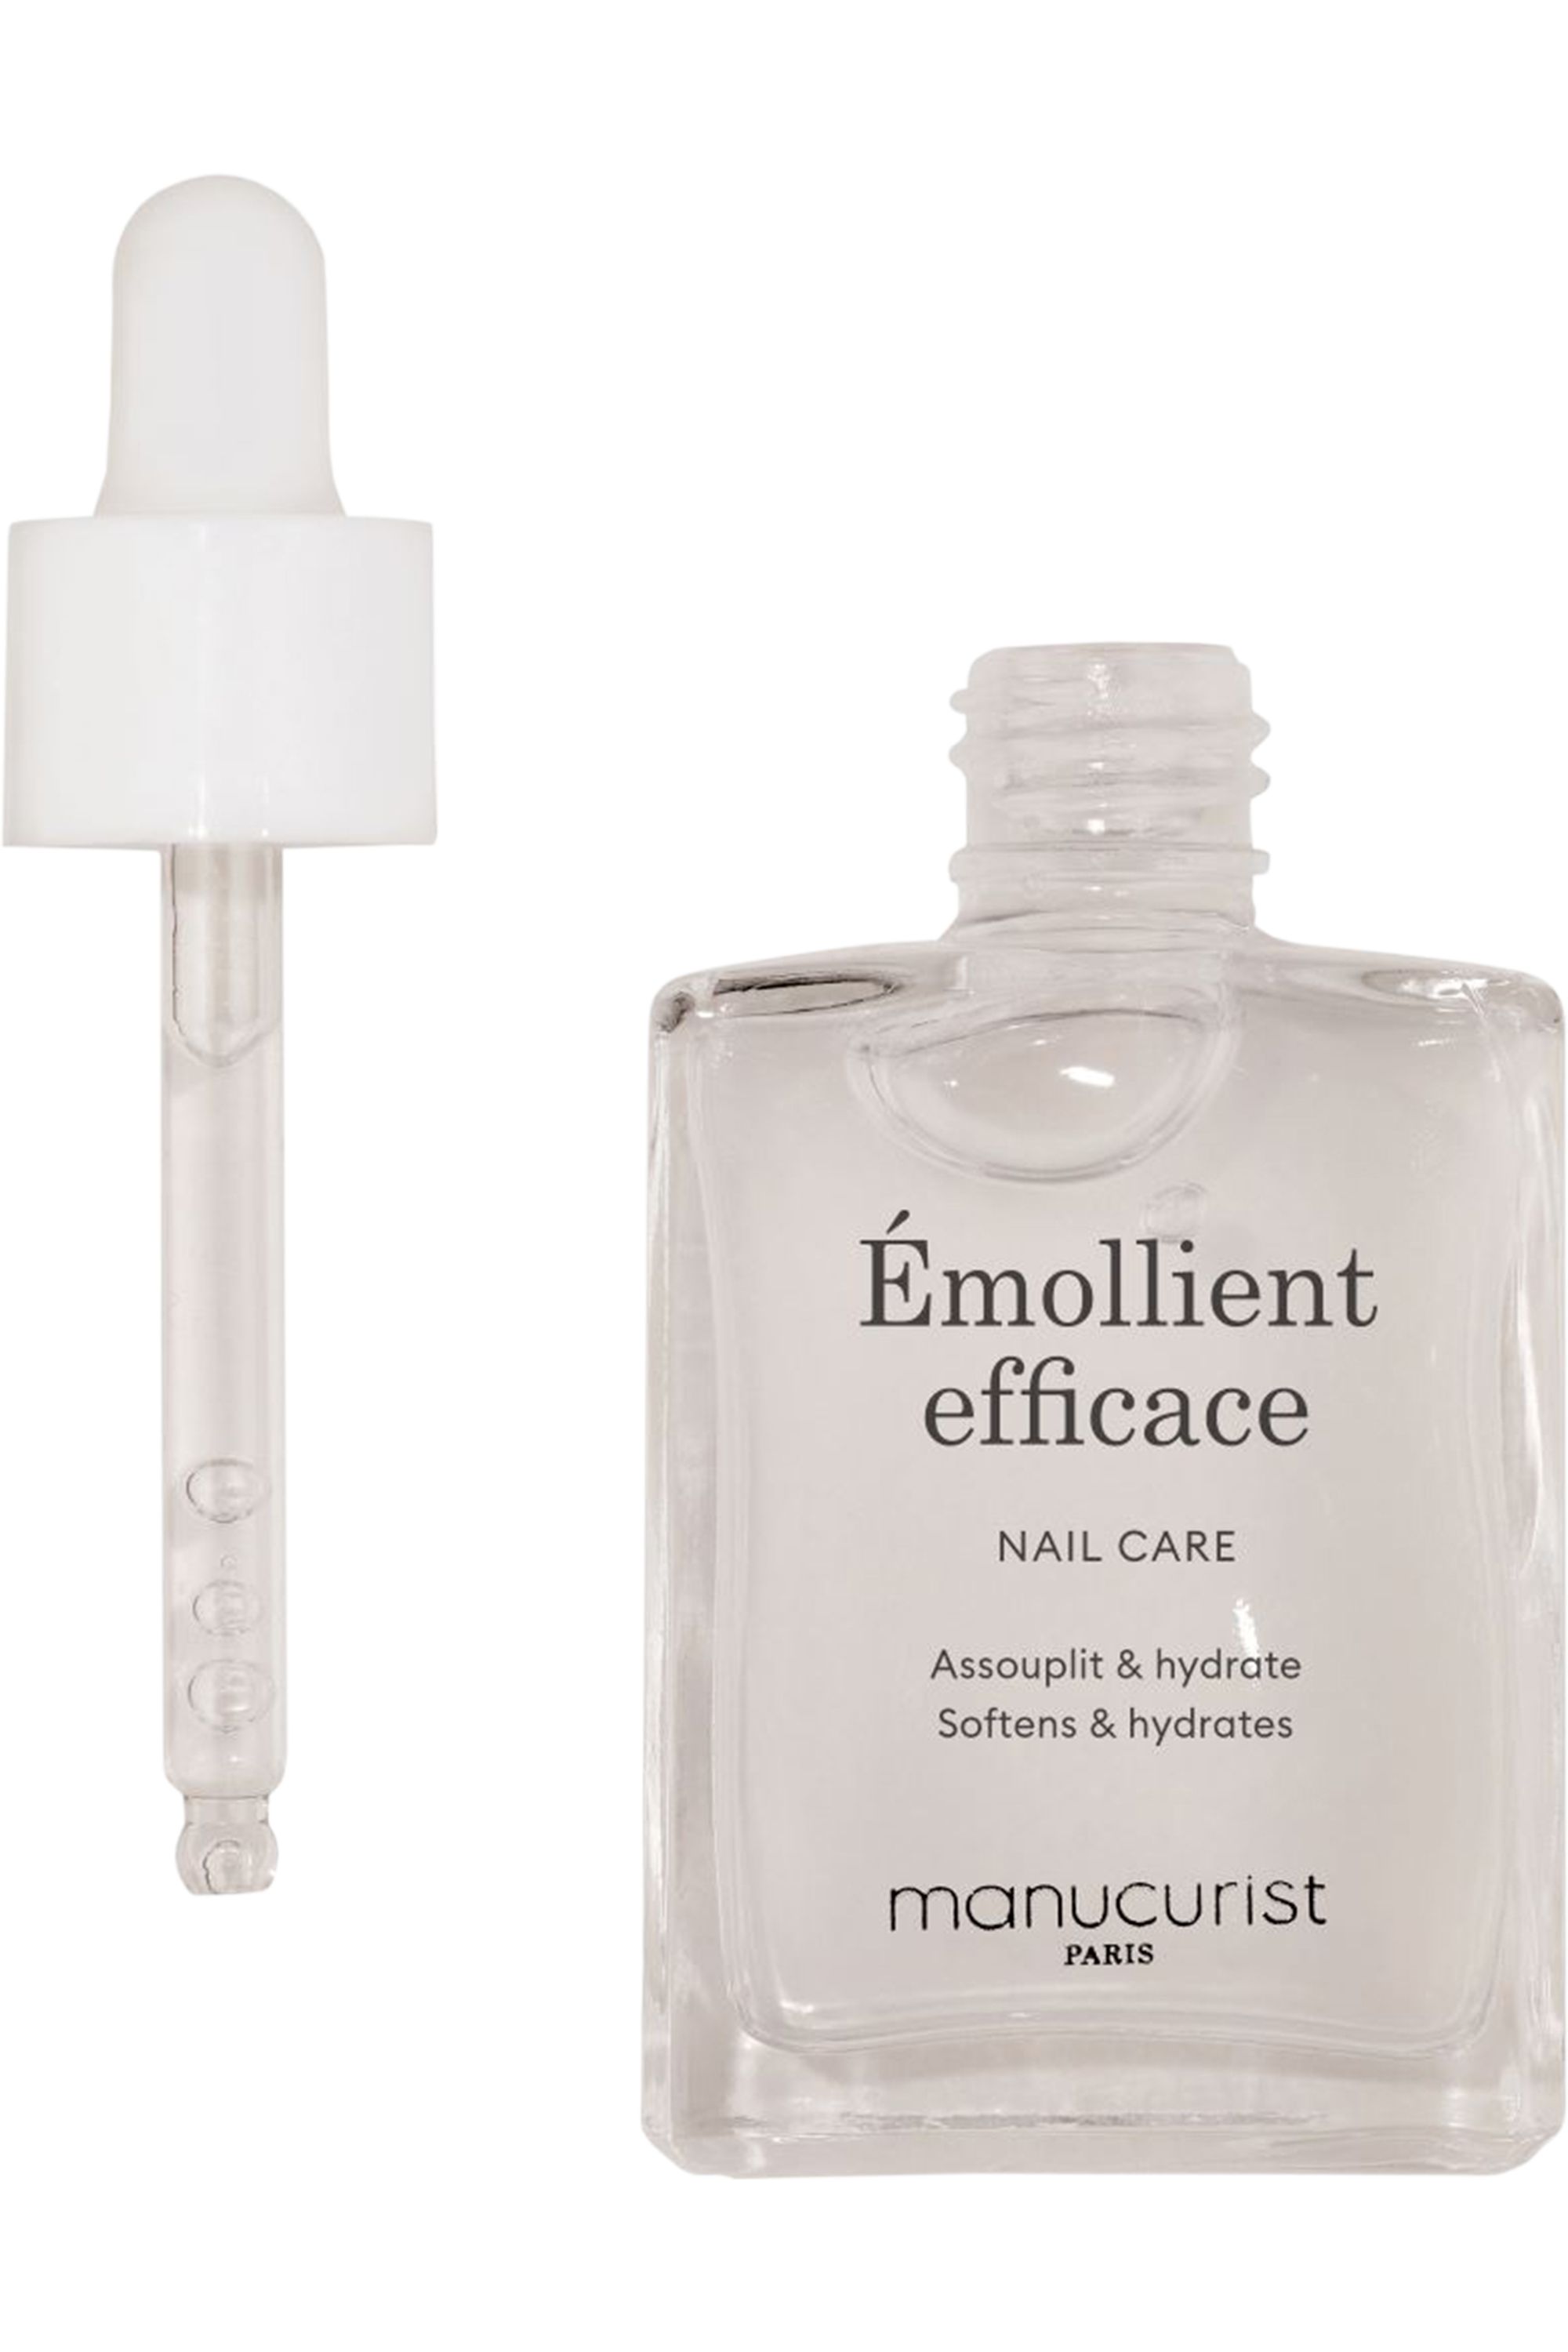 Nailmatic - Vernis soin durcisseur Strong Care - Blissim